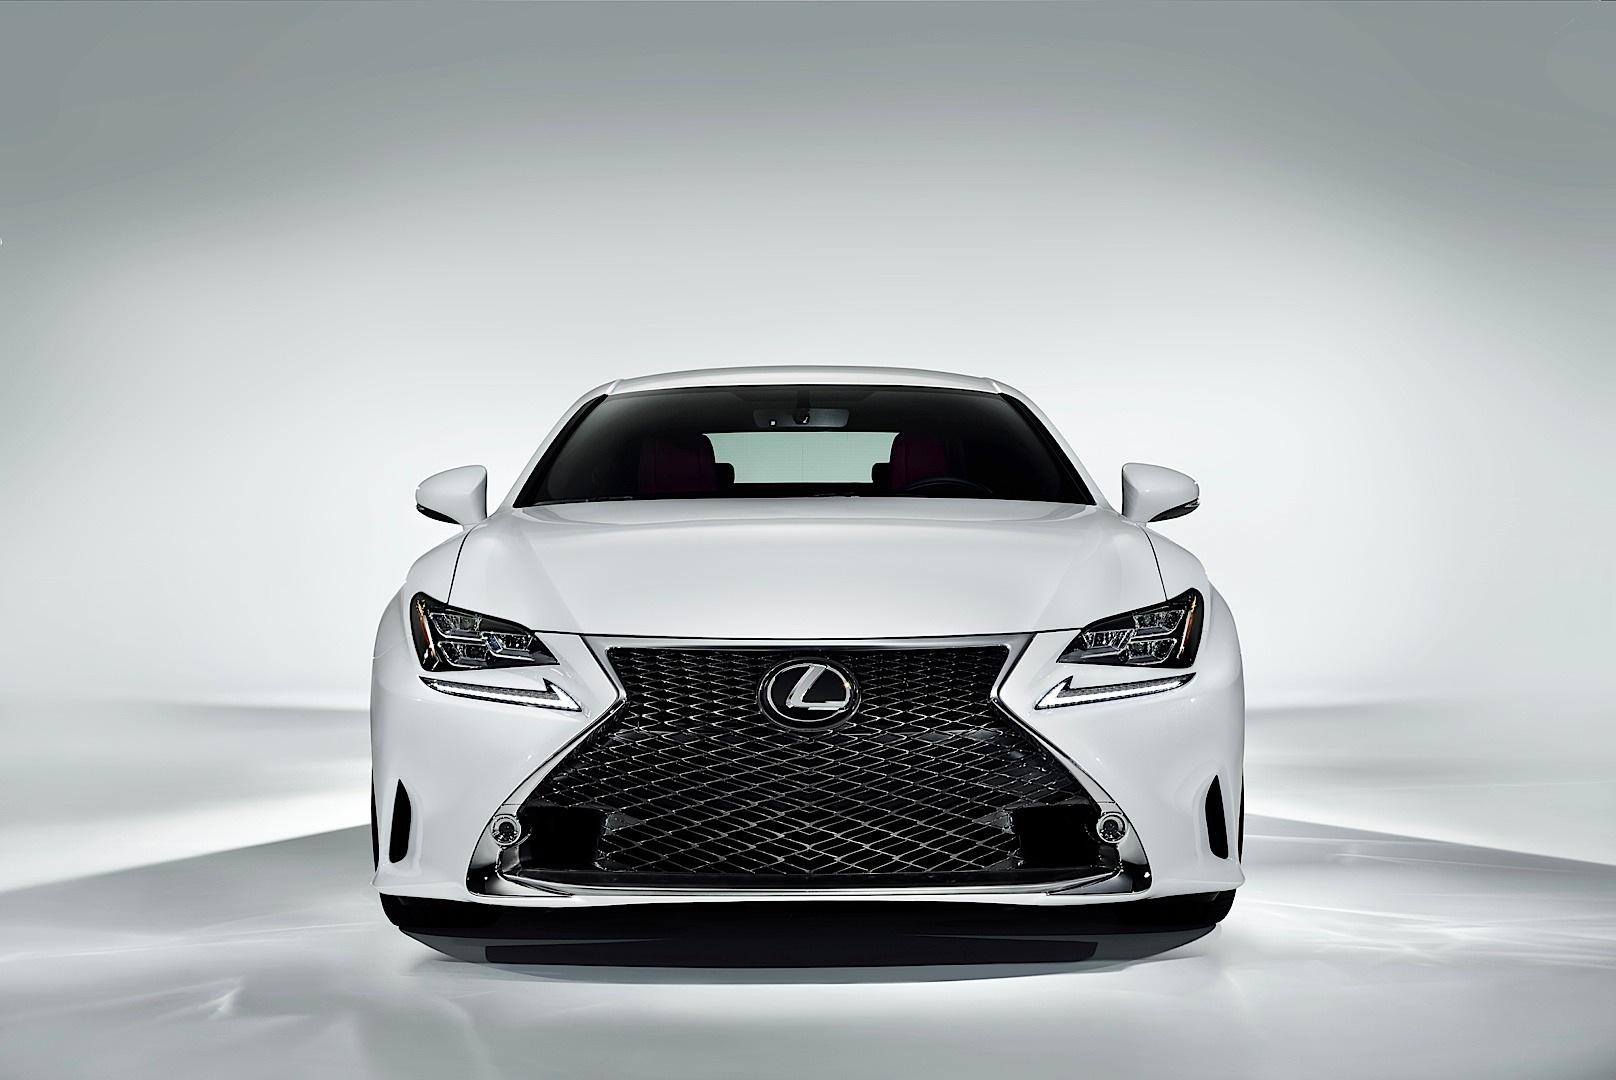 Lexus RC, RC F: Your HD Wallpaper Are Here